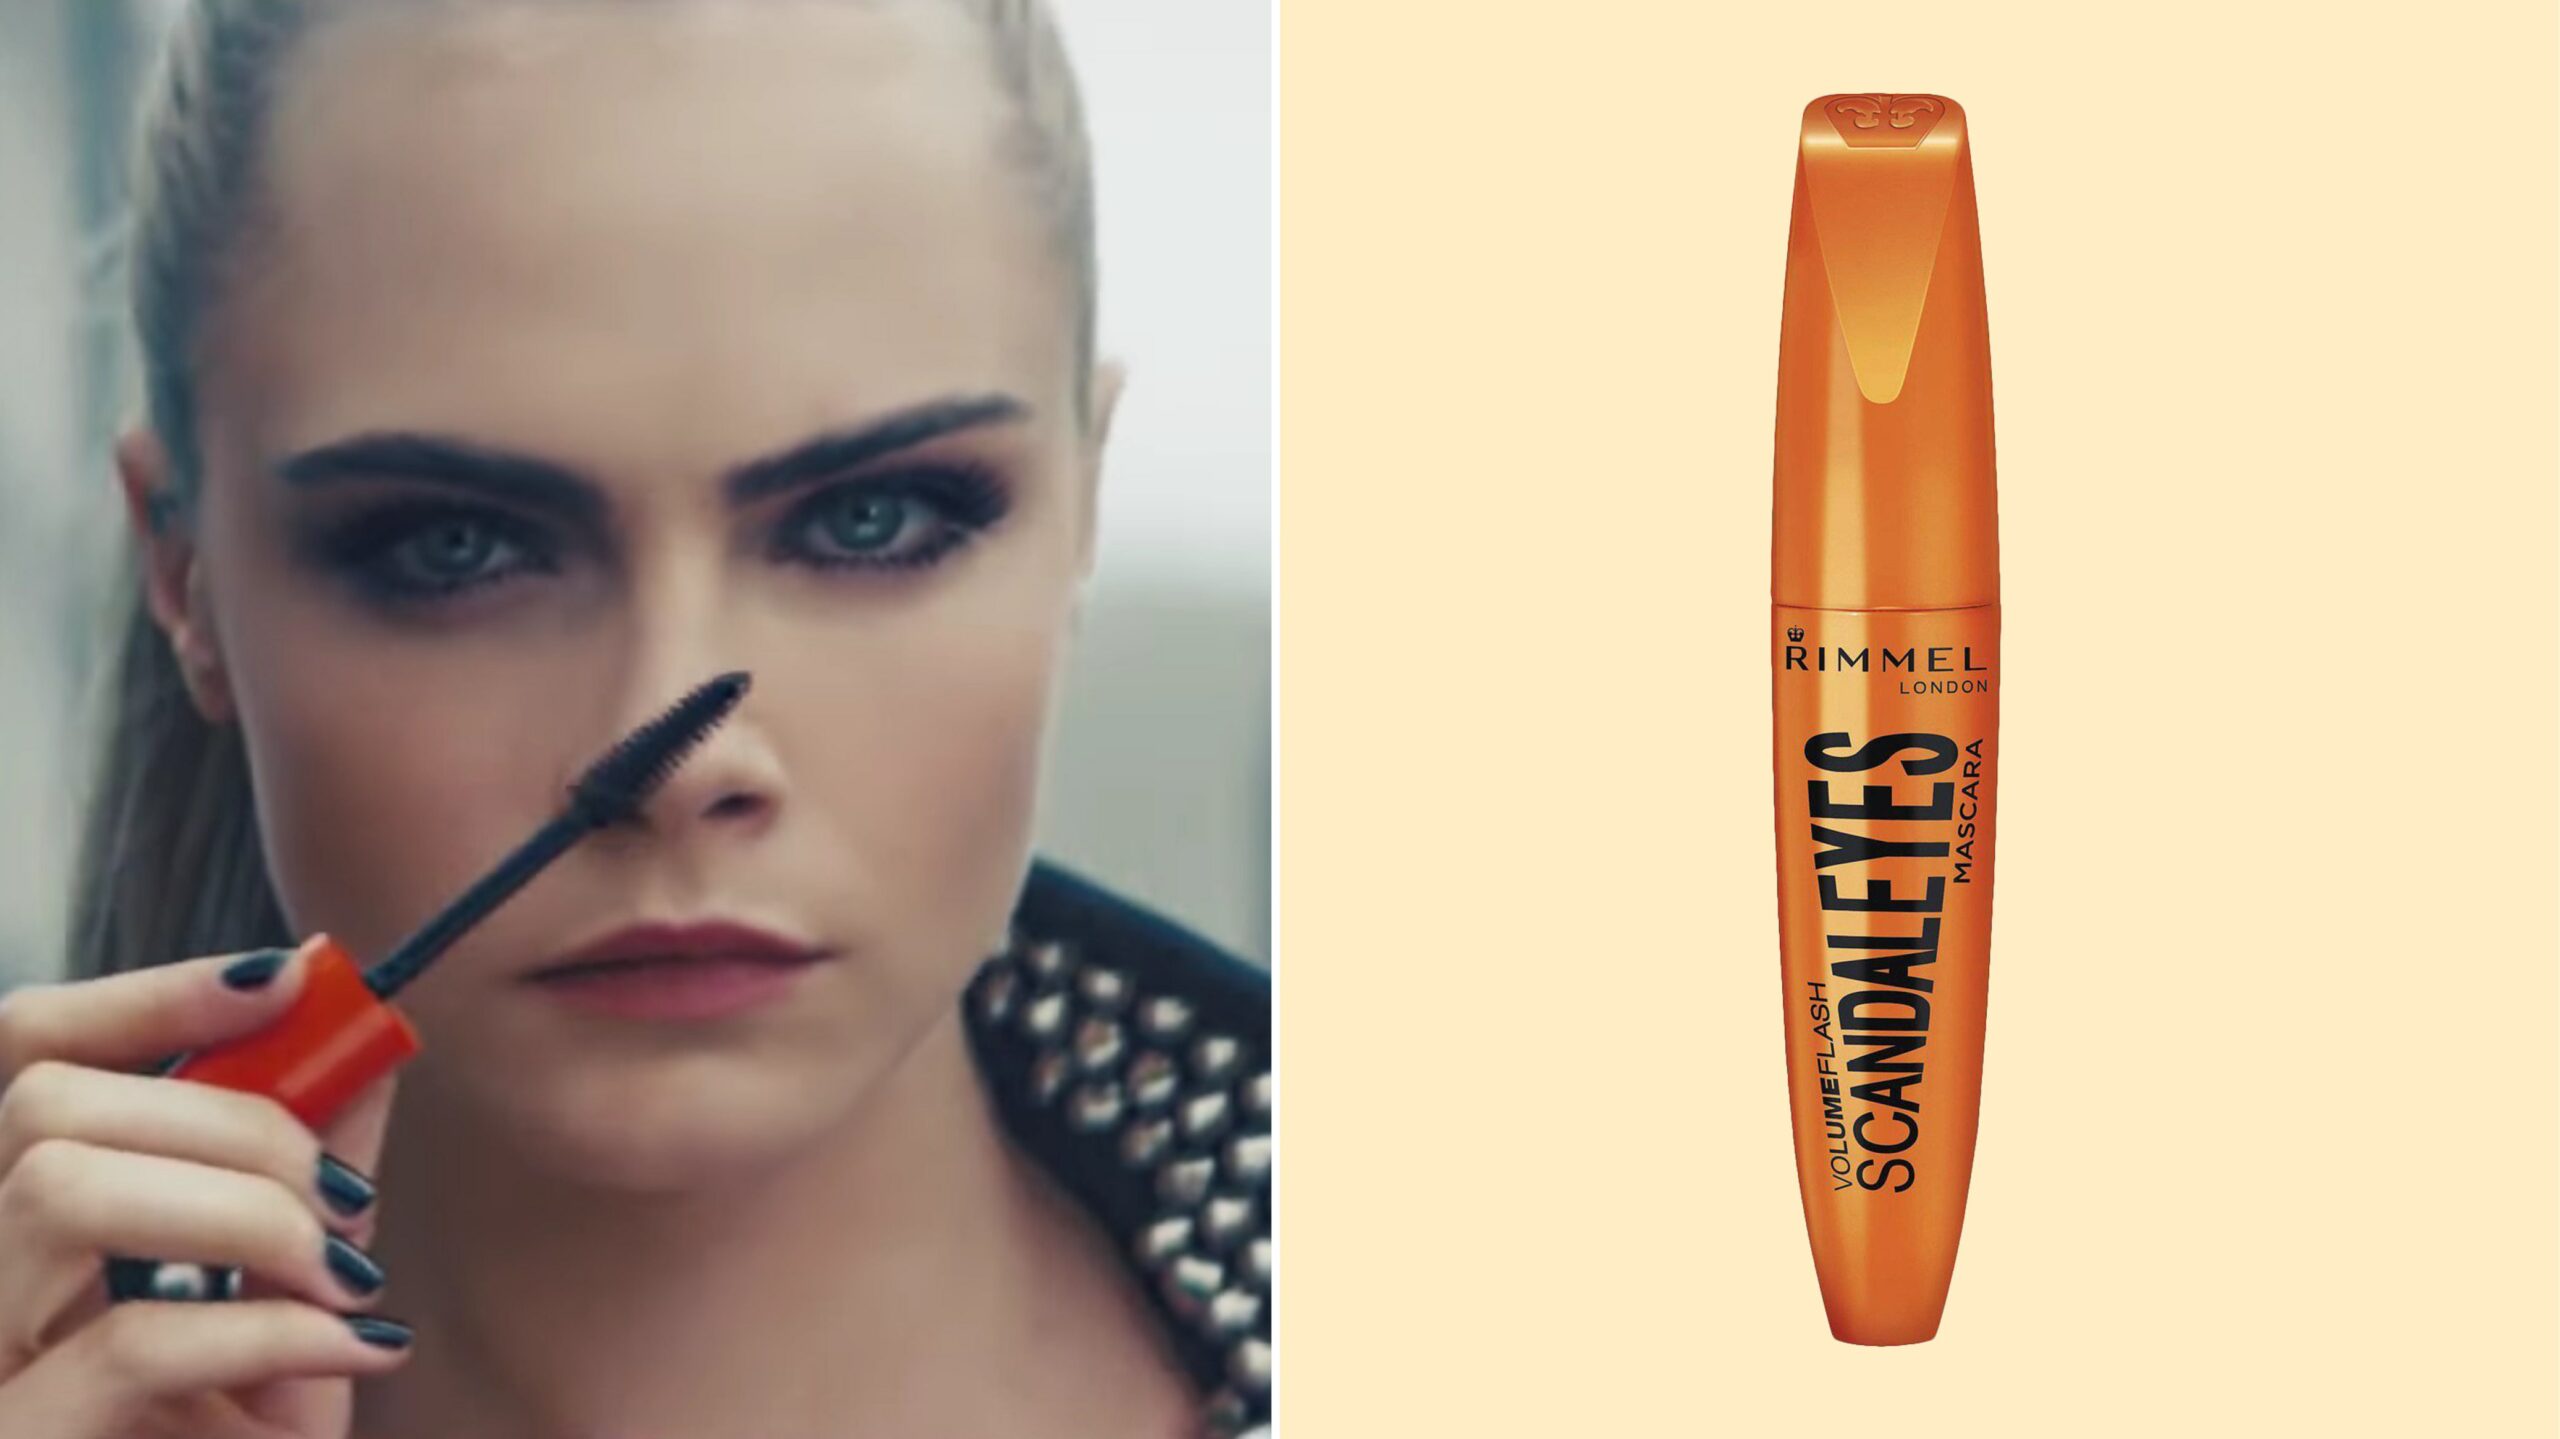 Who is the face of Rimmel London?